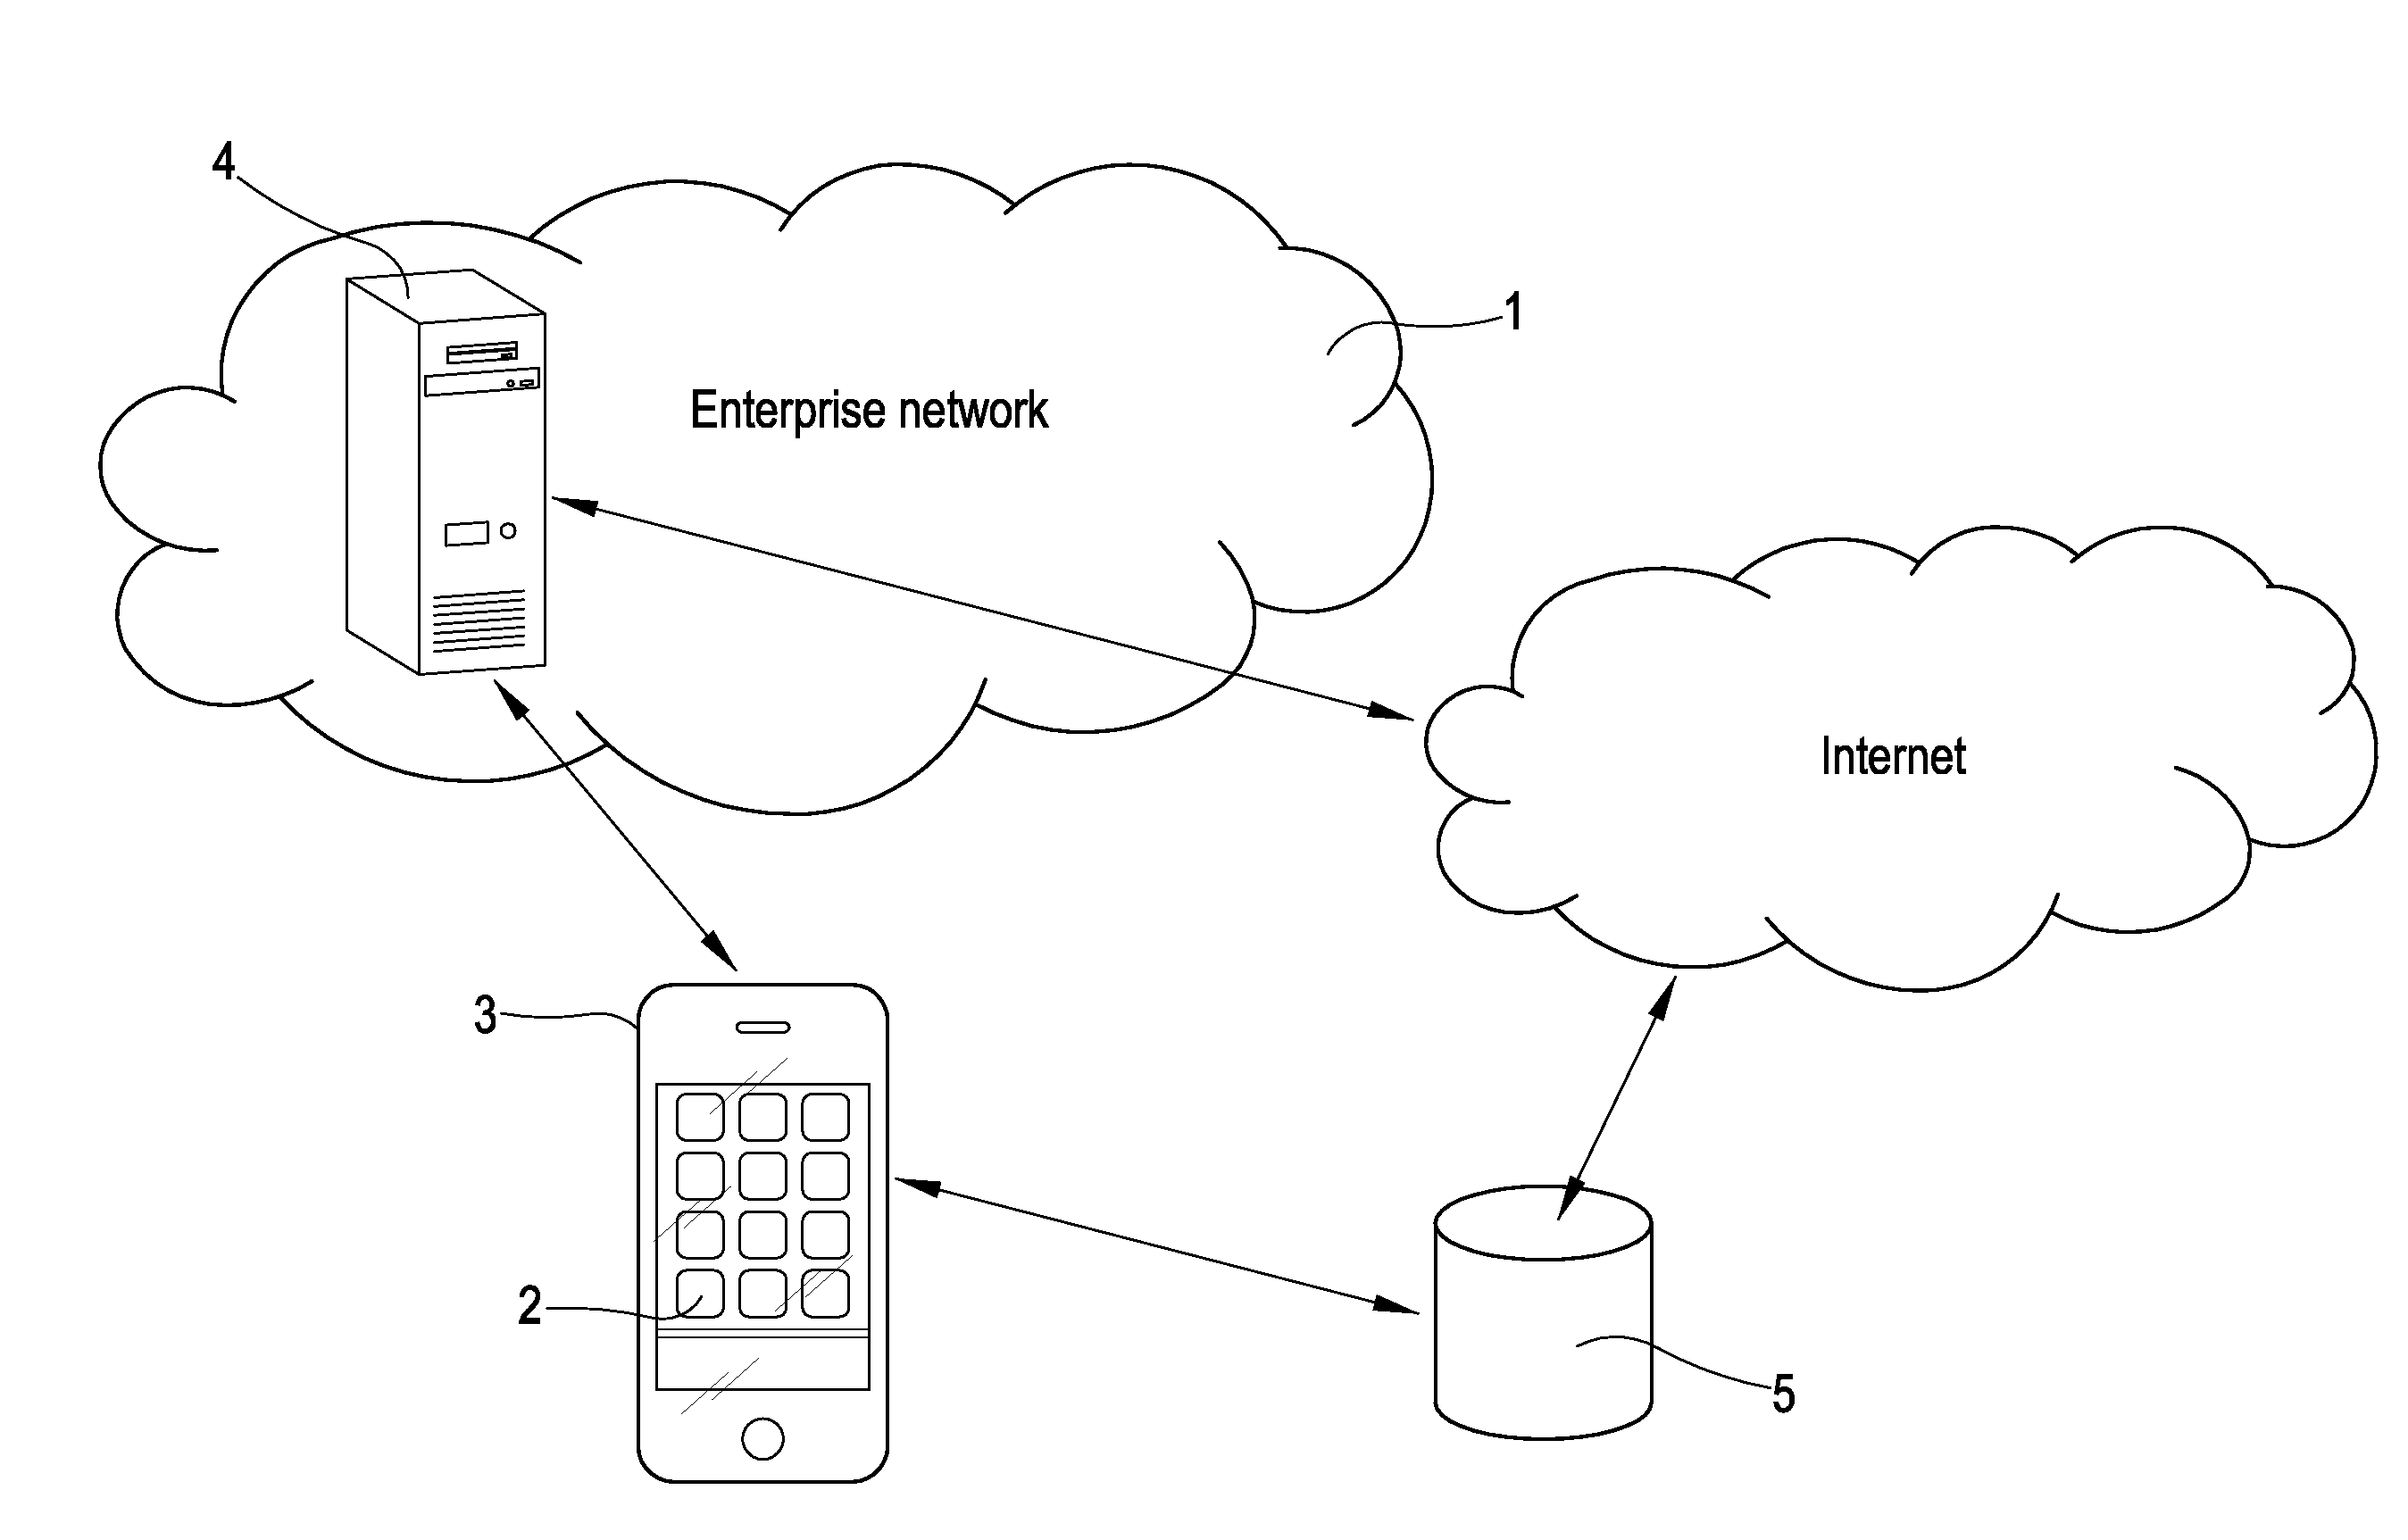 Managment system of the resources of an access connection provided by an enterprise